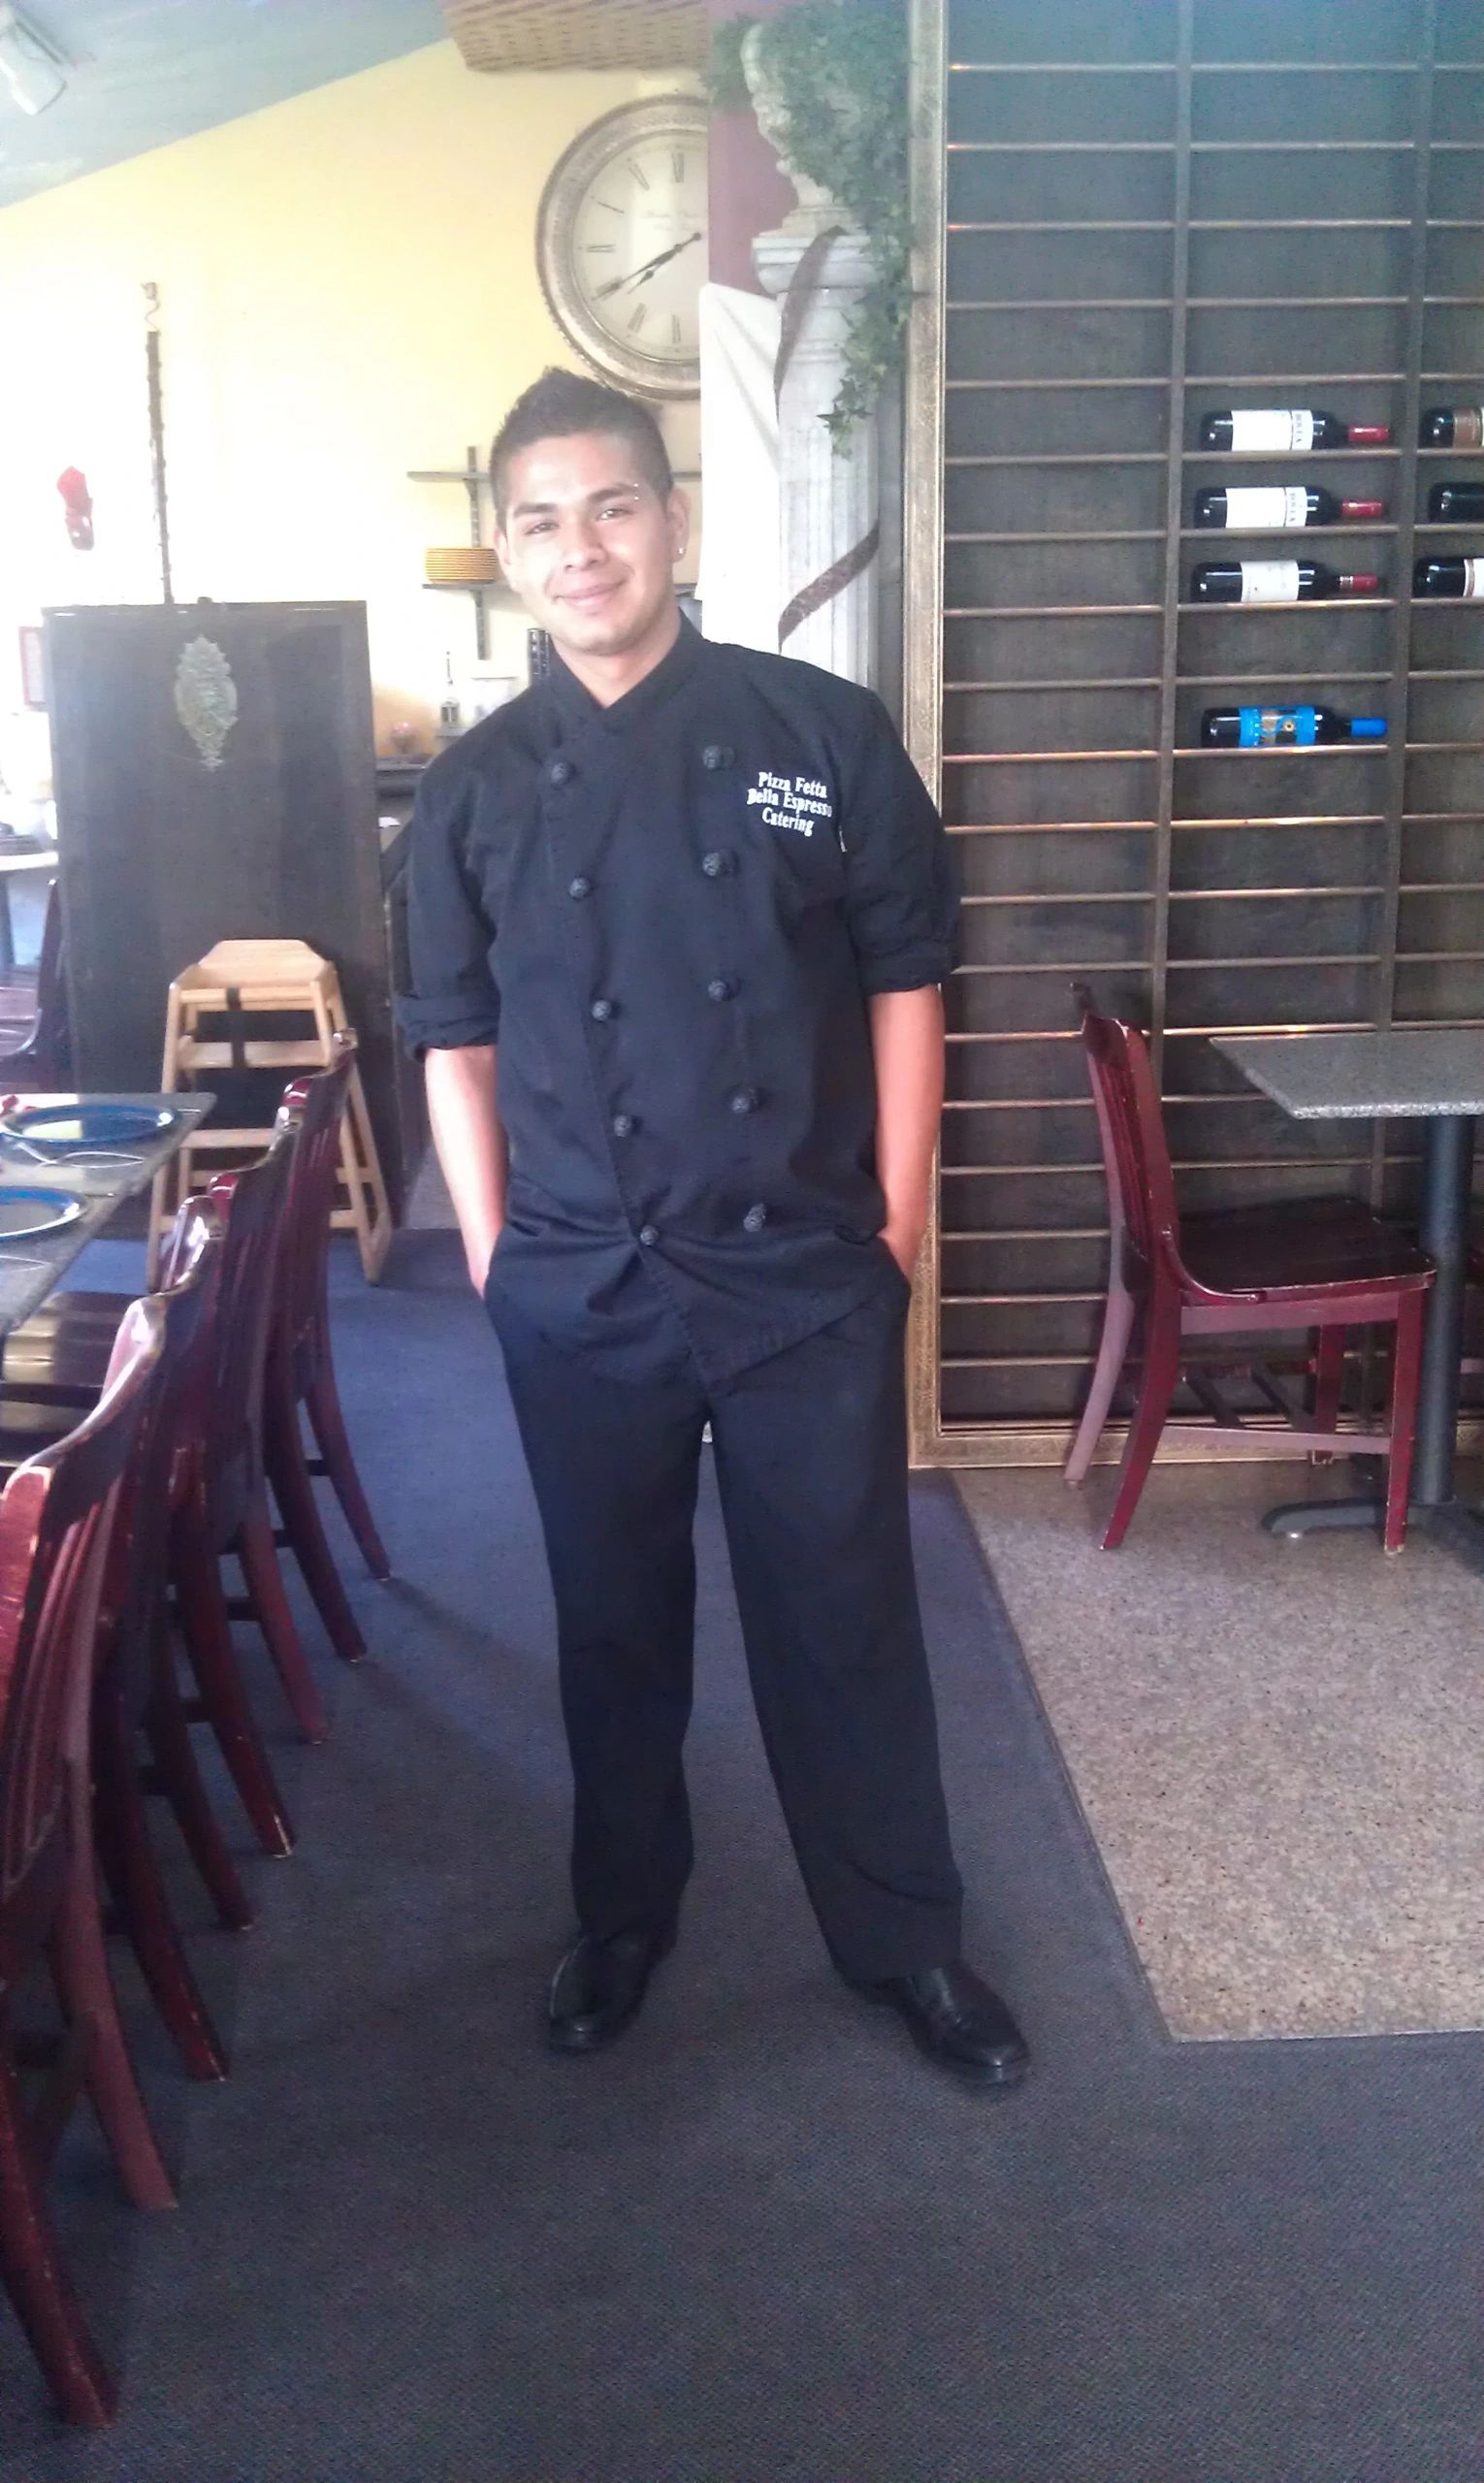 Julio ready for the event in our privet dining room